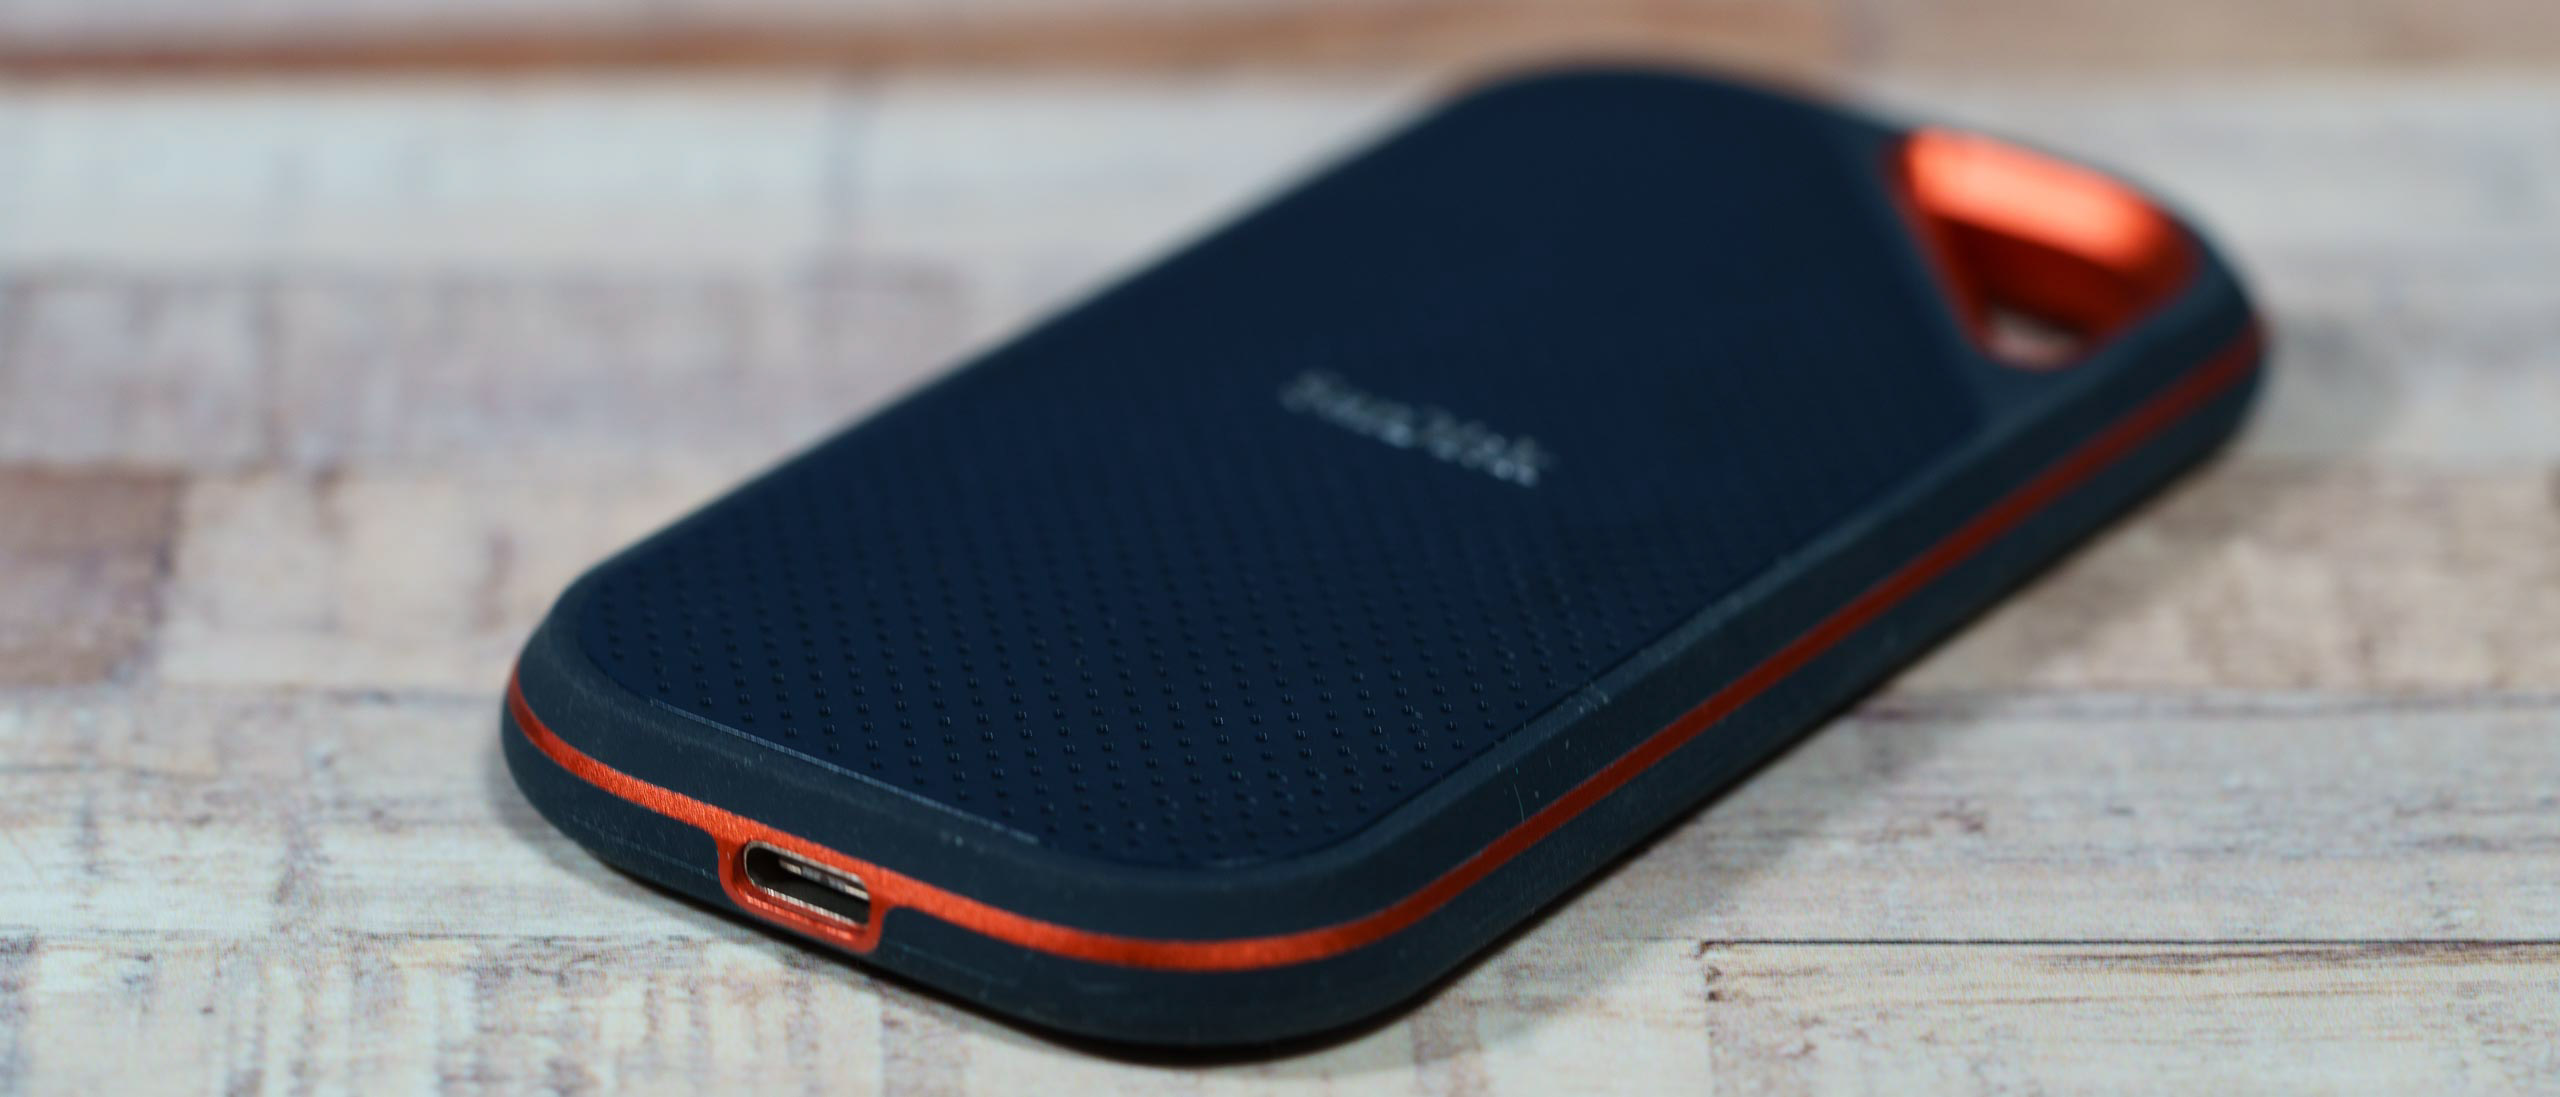 SanDisk Extreme PRO and Crucial X6 4TB Portable SSDs Review